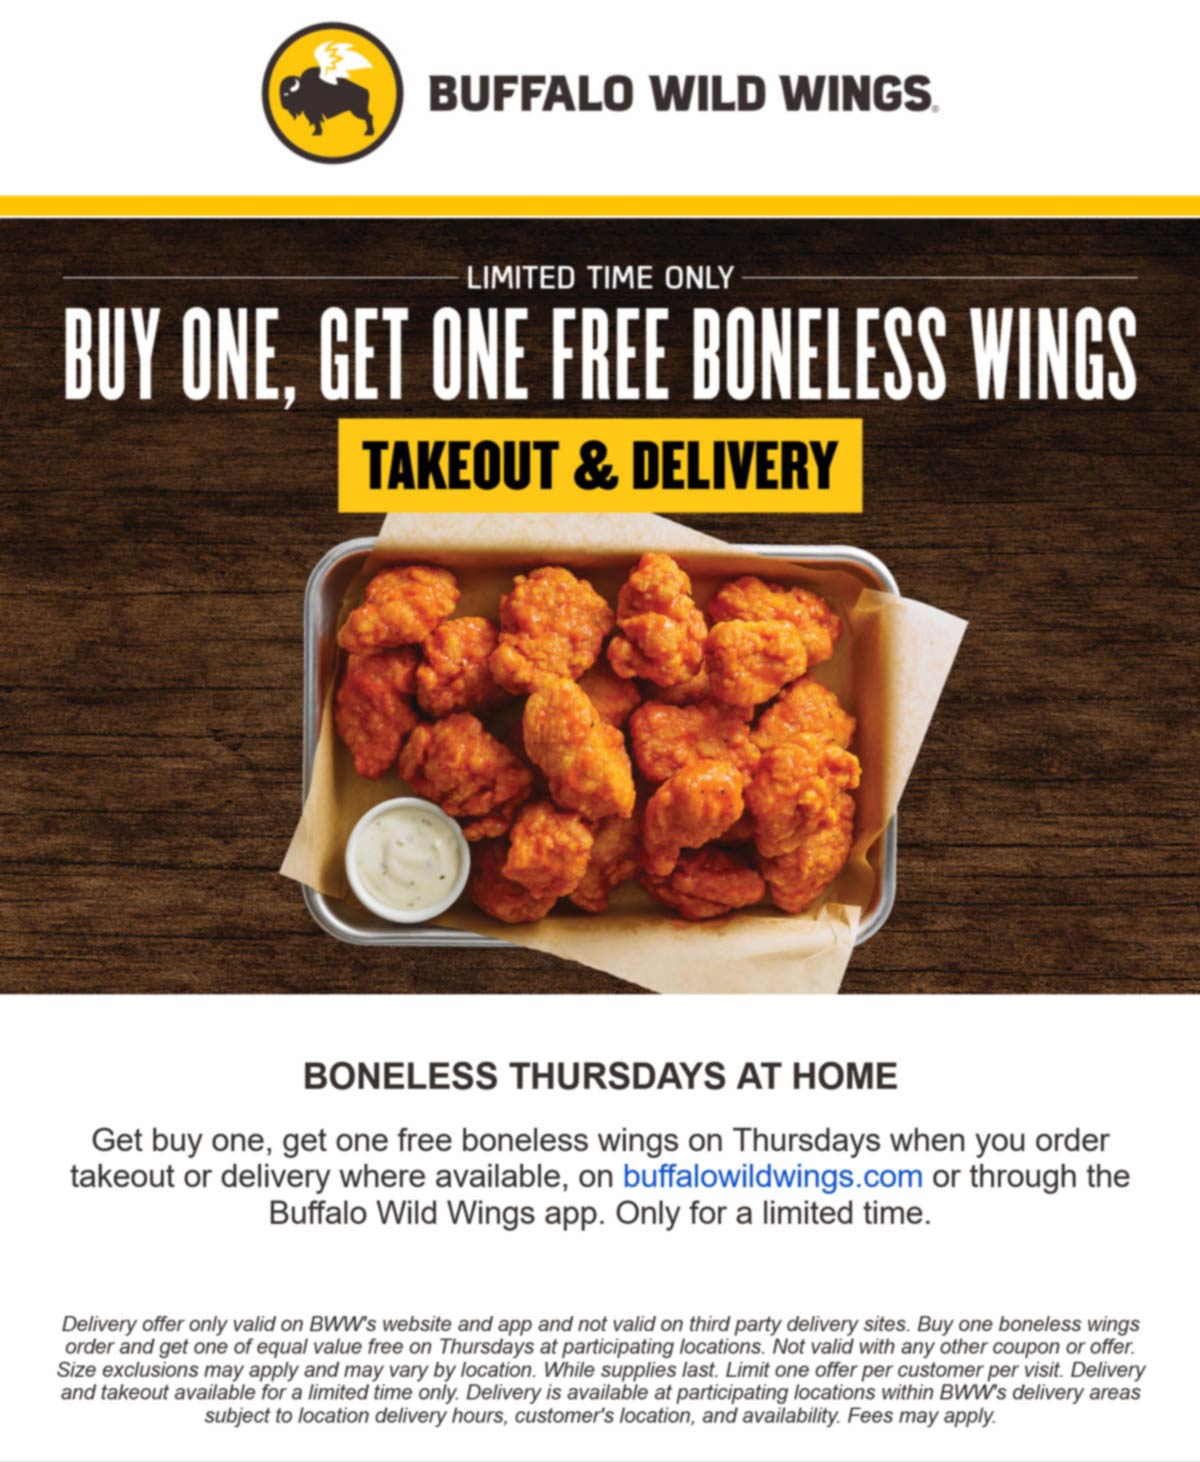 [May, 2021] Second boneless chicken wings free today at Buffalo Wild